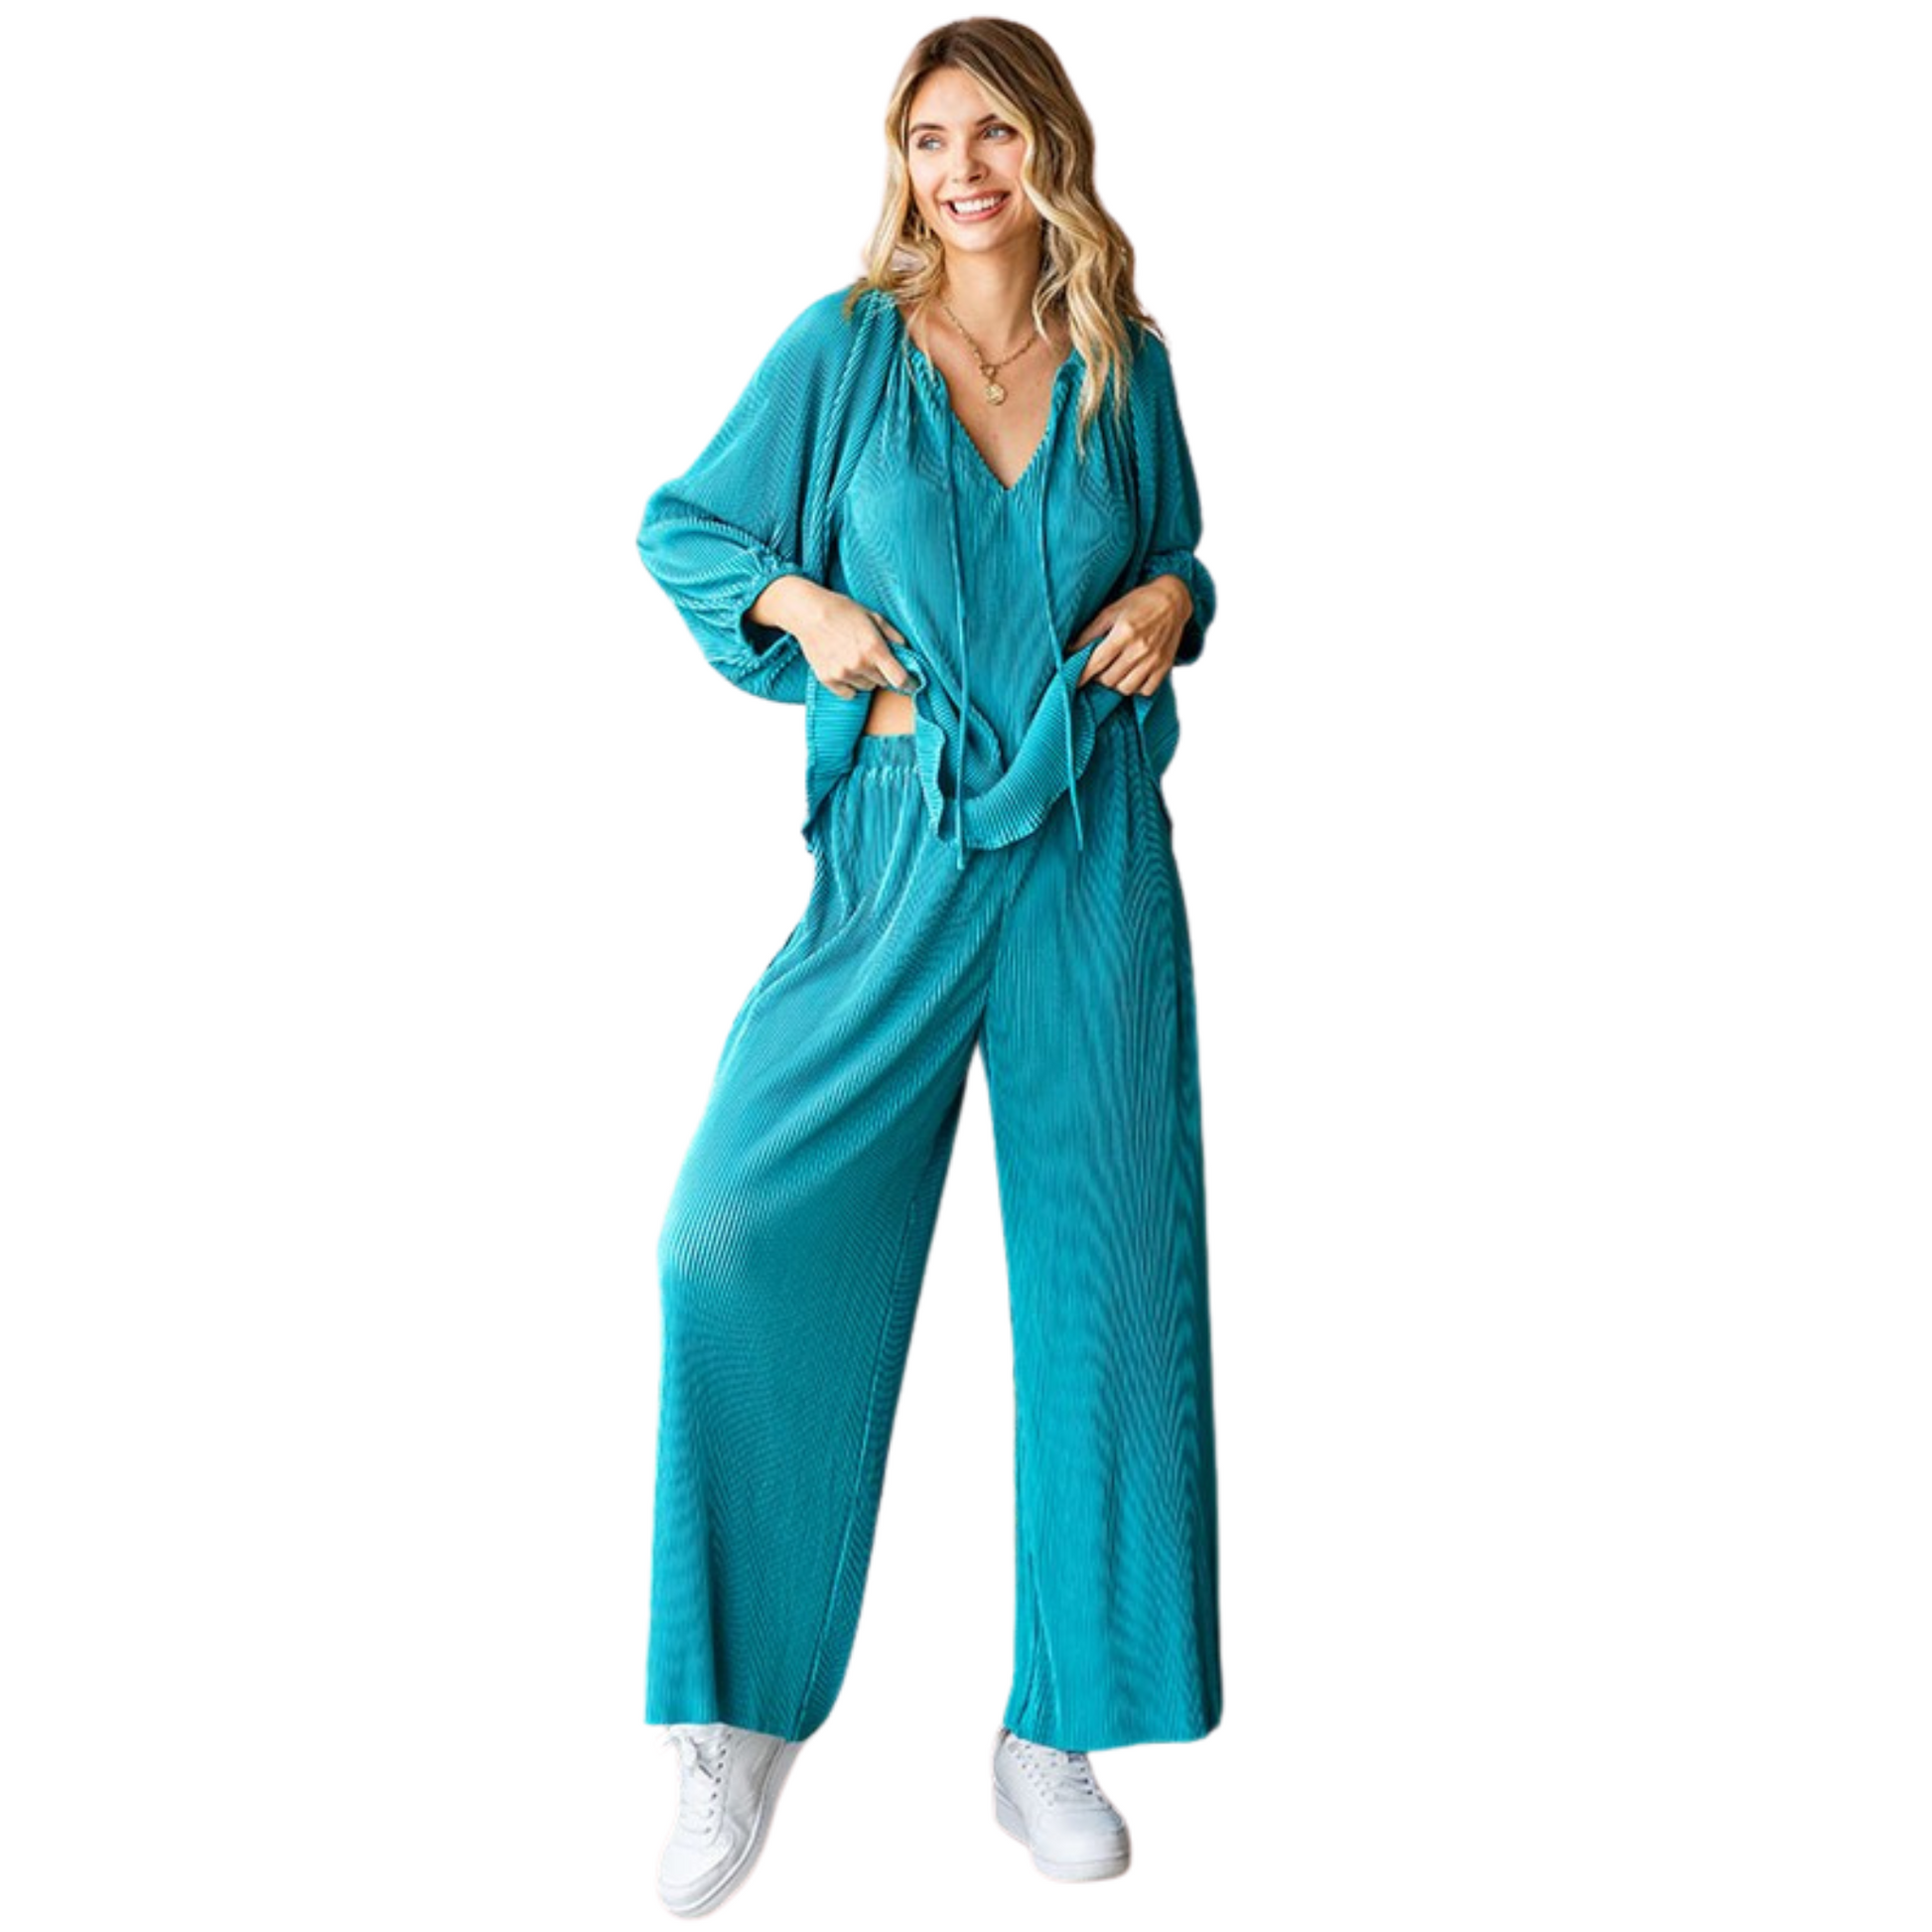 Effortlessly chic and comfortable, our Plus size Solid Color Pleated Top and Bottom Set is perfect for any occasion. The relaxed fit palazzo pants feature an elastic banded waistline for a flattering and comfortable fit. Paired with the matching top, this set is a must-have in your wardrobe. Available in a stunning teal color.